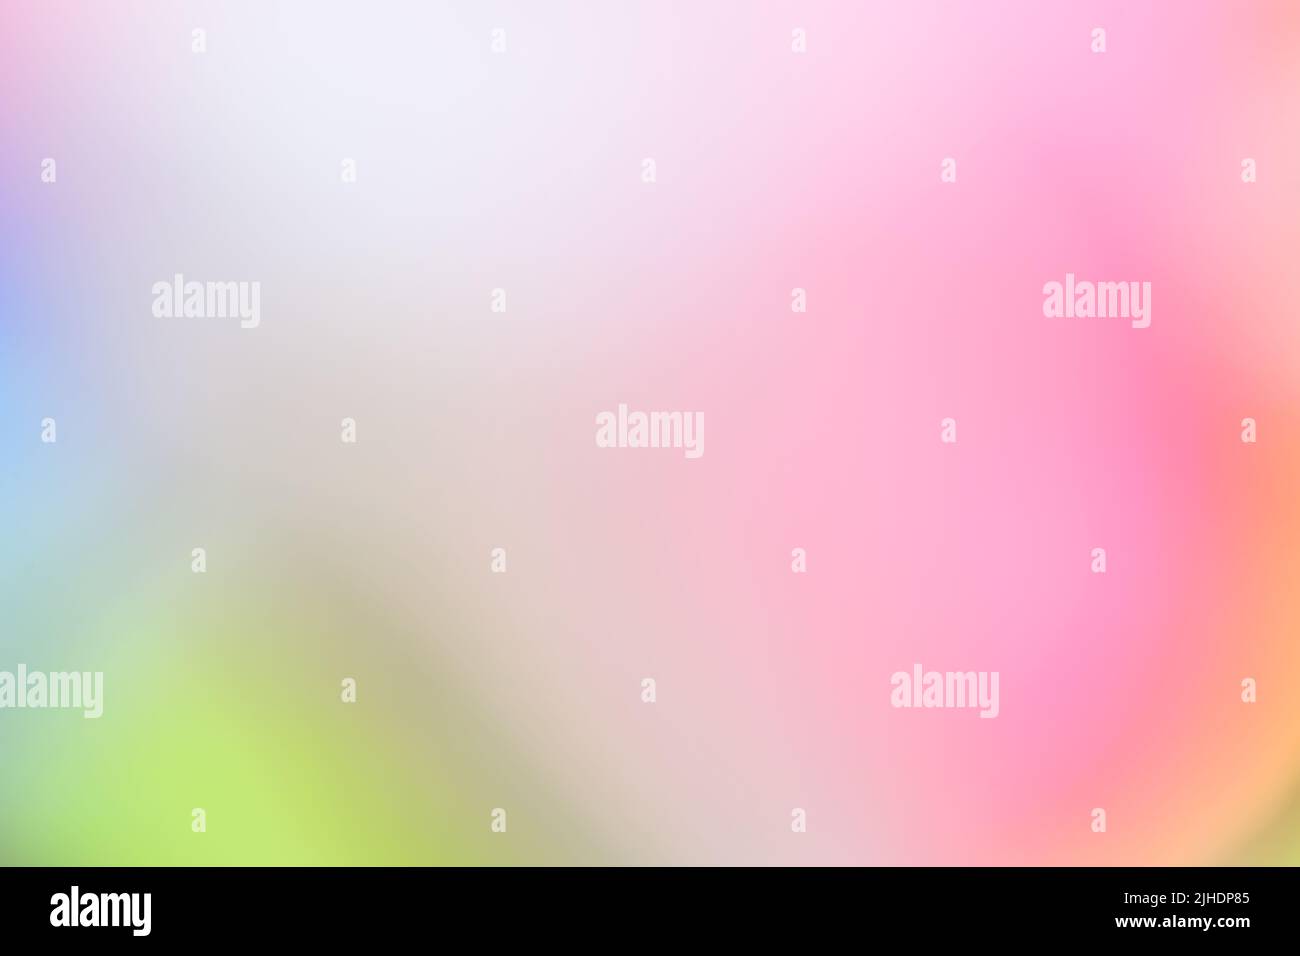 Colorful pastel background wallpaper, soft defocused smooth dreamy pink tones. Stock Photo